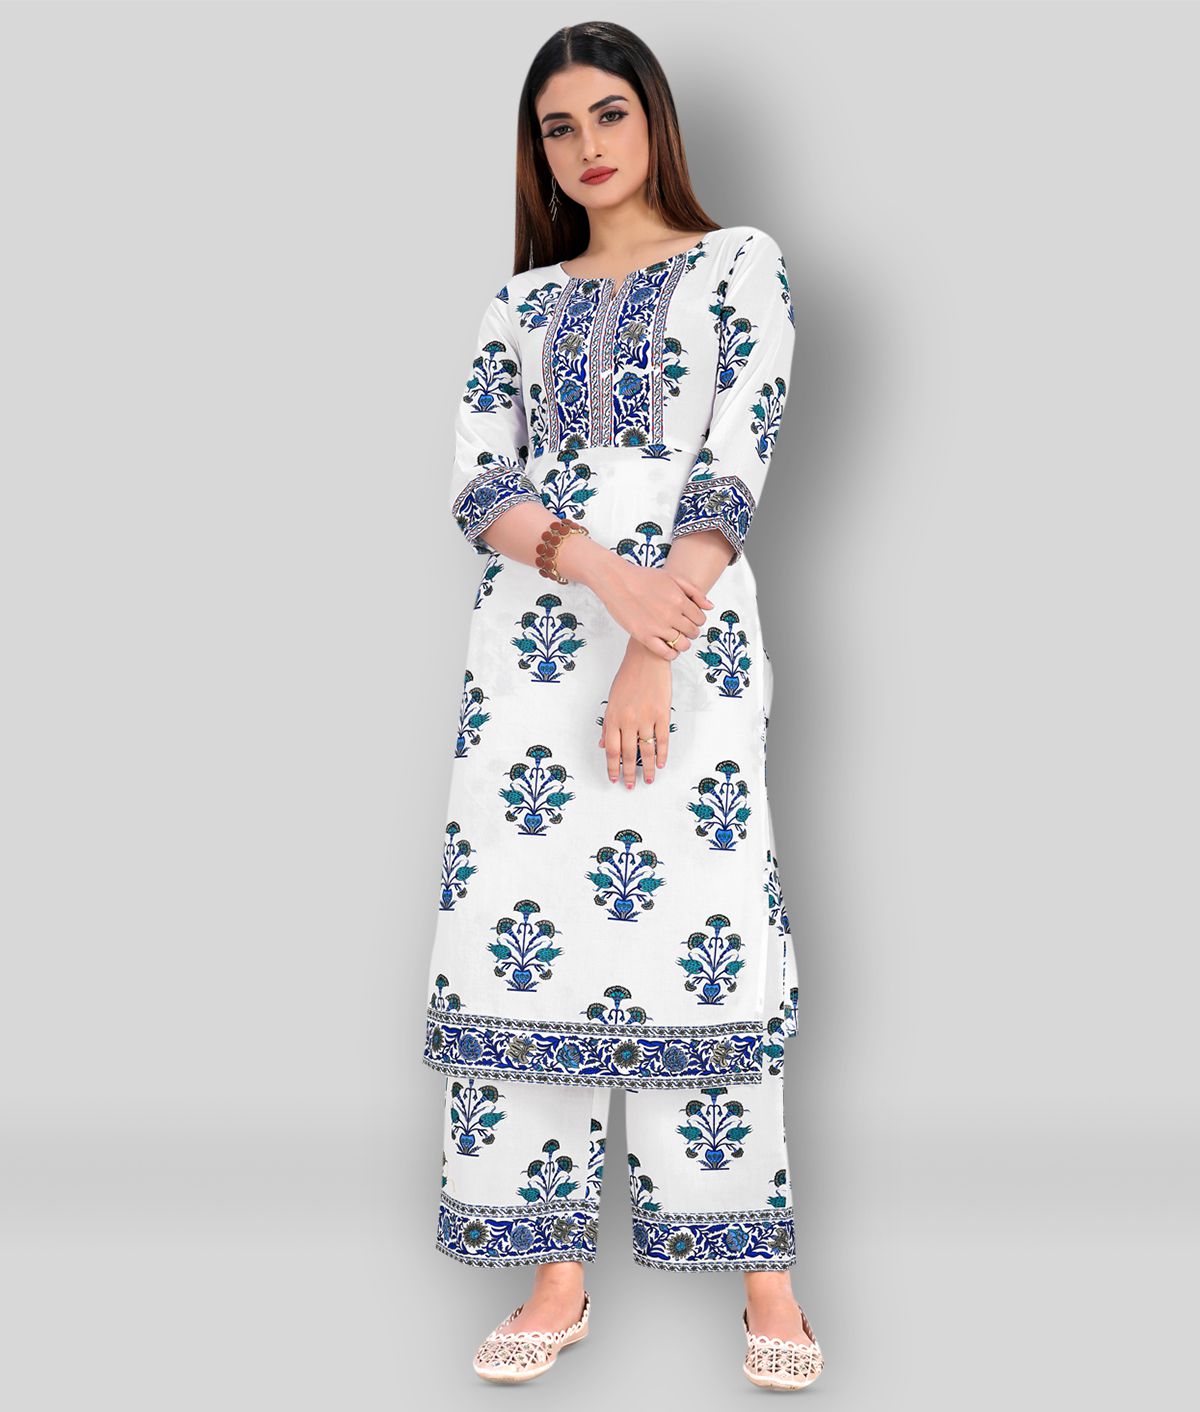     			Vbuyz - White Straight Cotton Women's Stitched Salwar Suit ( Pack of 1 )